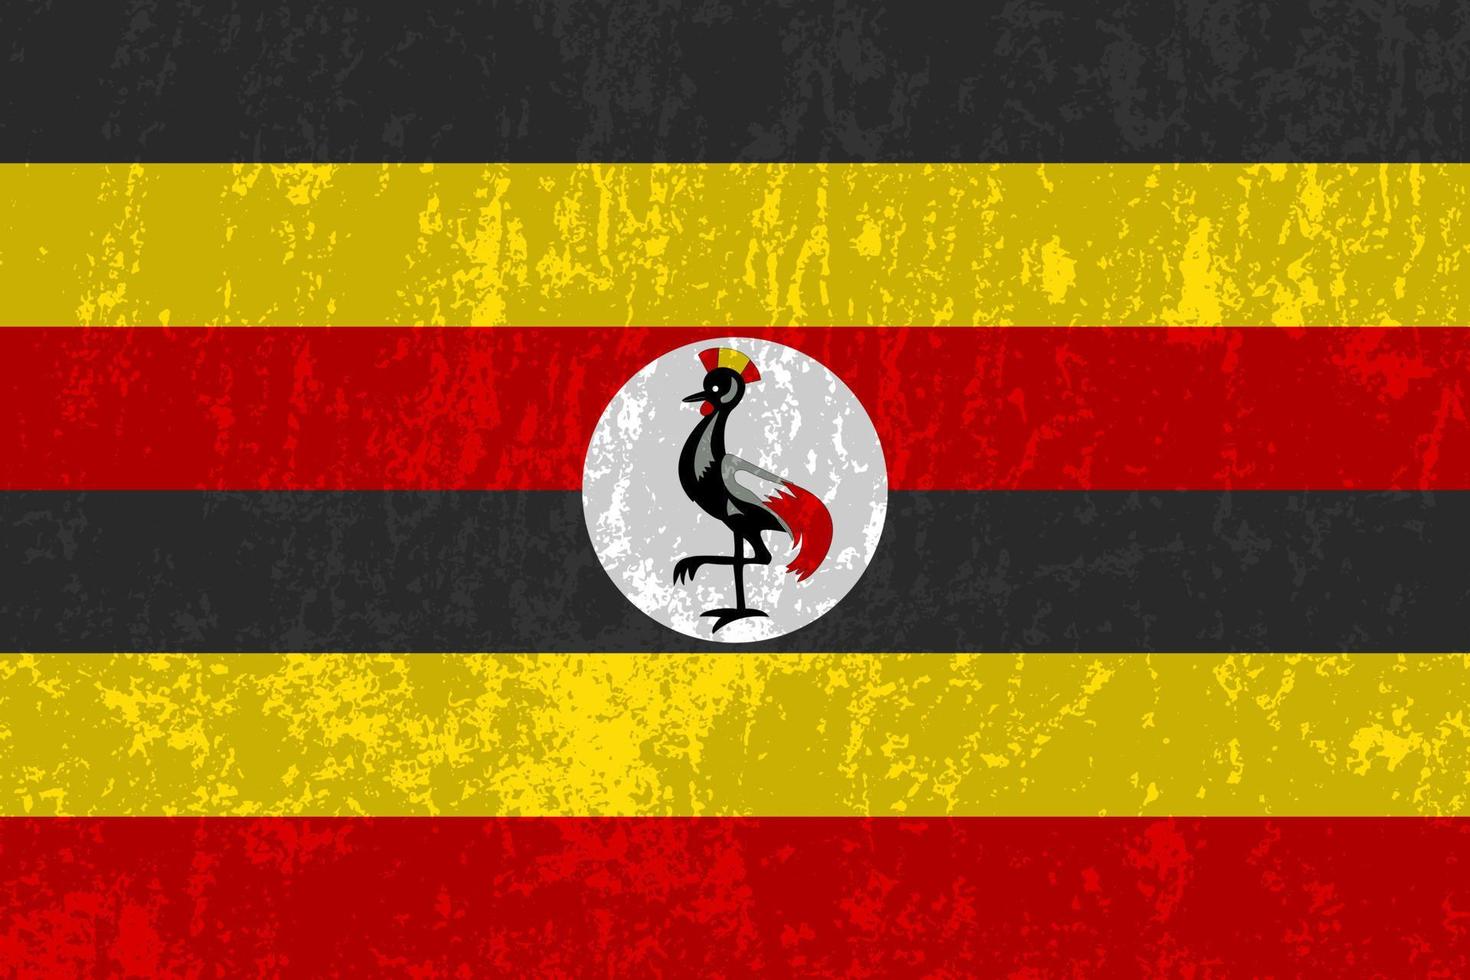 Uganda flag, official colors and proportion. Vector illustration.